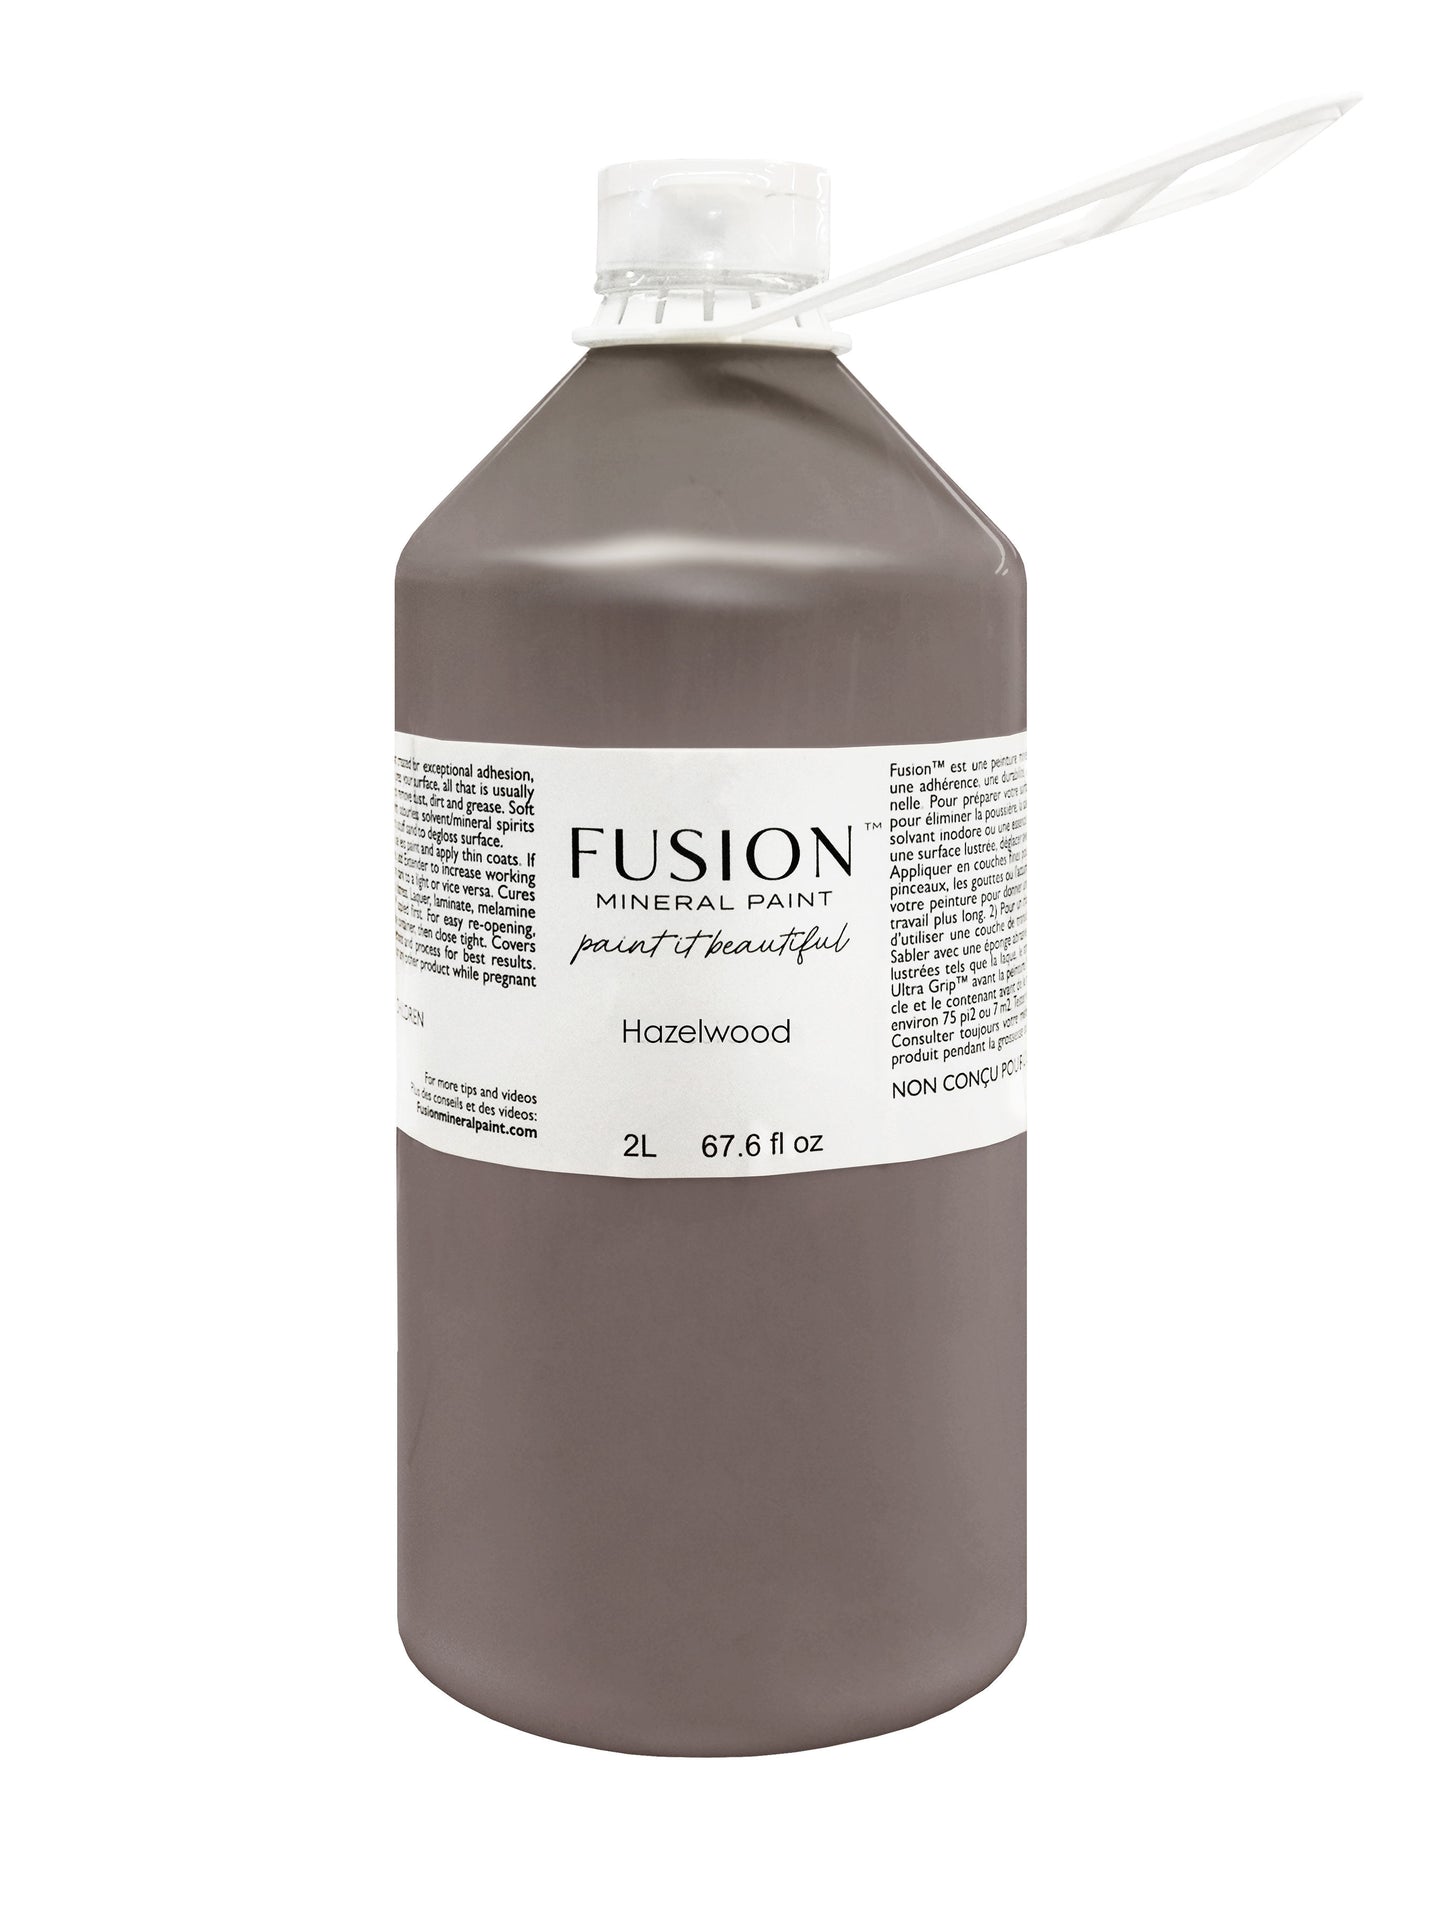 HAZELWOOD - FUSION MINERAL PAINT